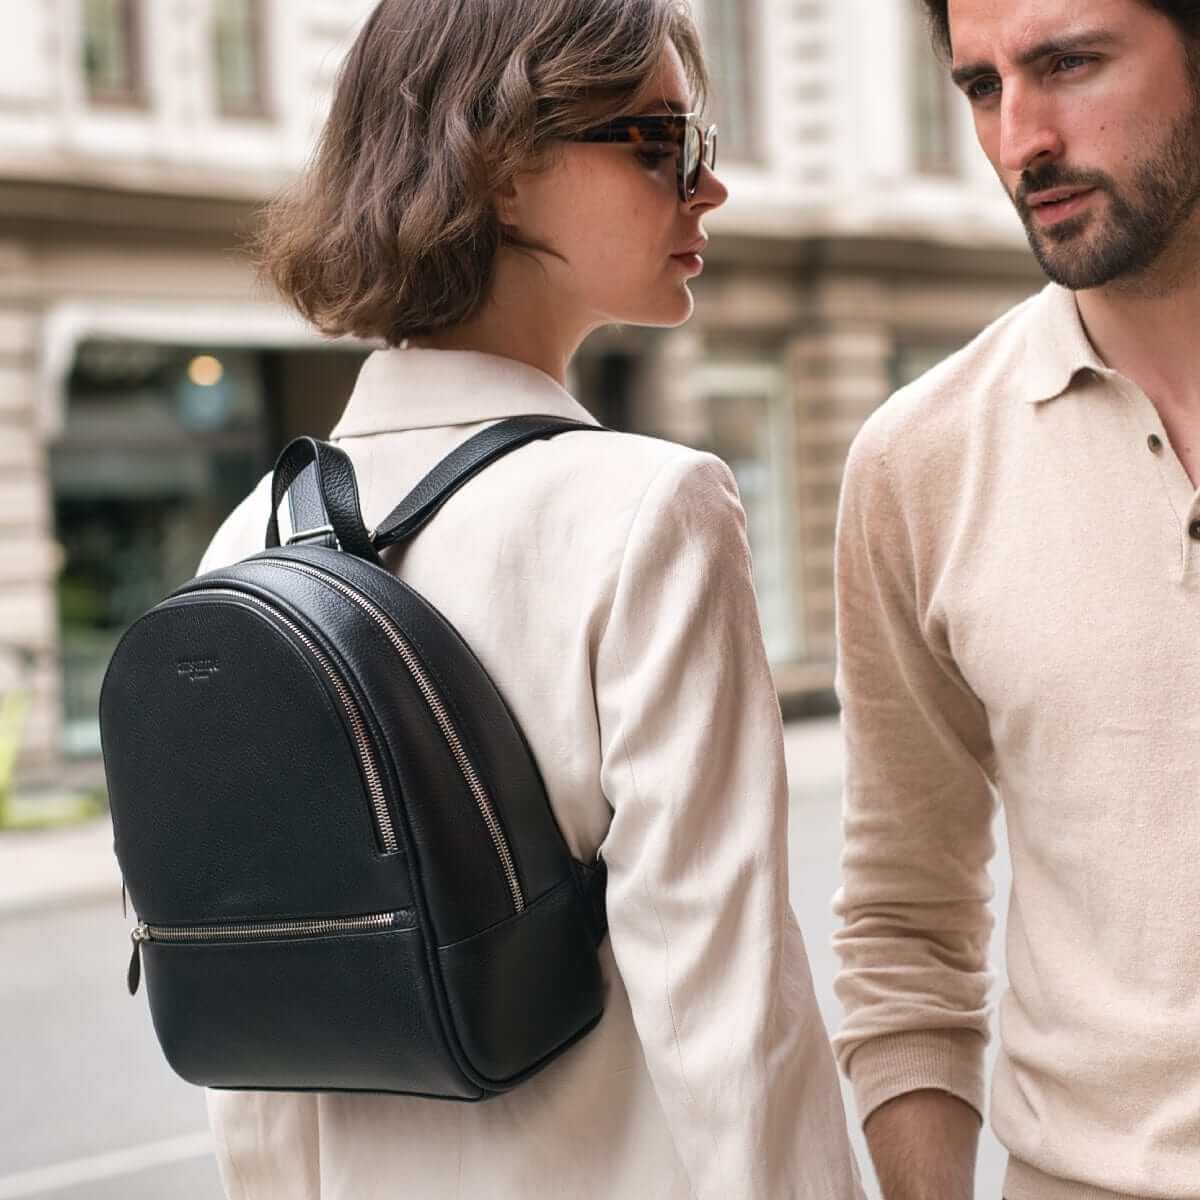 An Arsante® Backpack Mini Leather Rich Black for Everyday Adventures